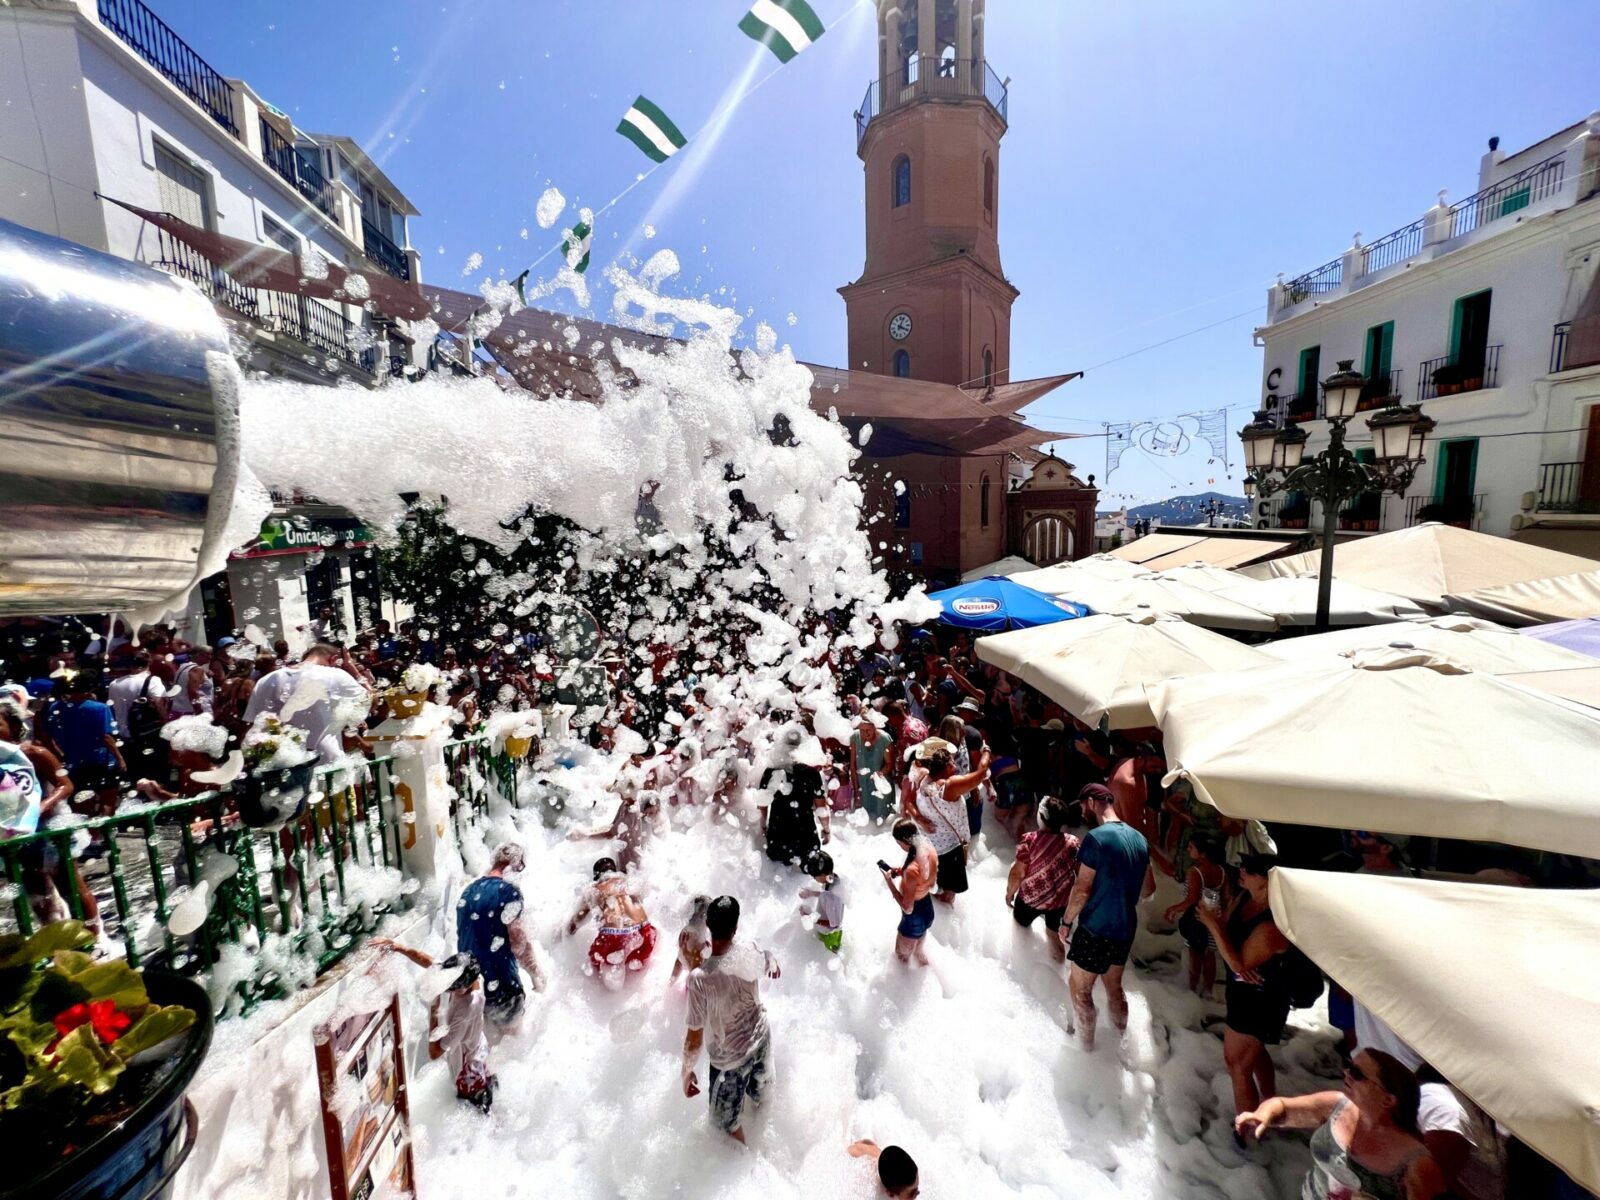 The image shows the church tower and the main square of Cómpeta, with white foam filling the square during the foam party of the Cómpeta Summer Feria.